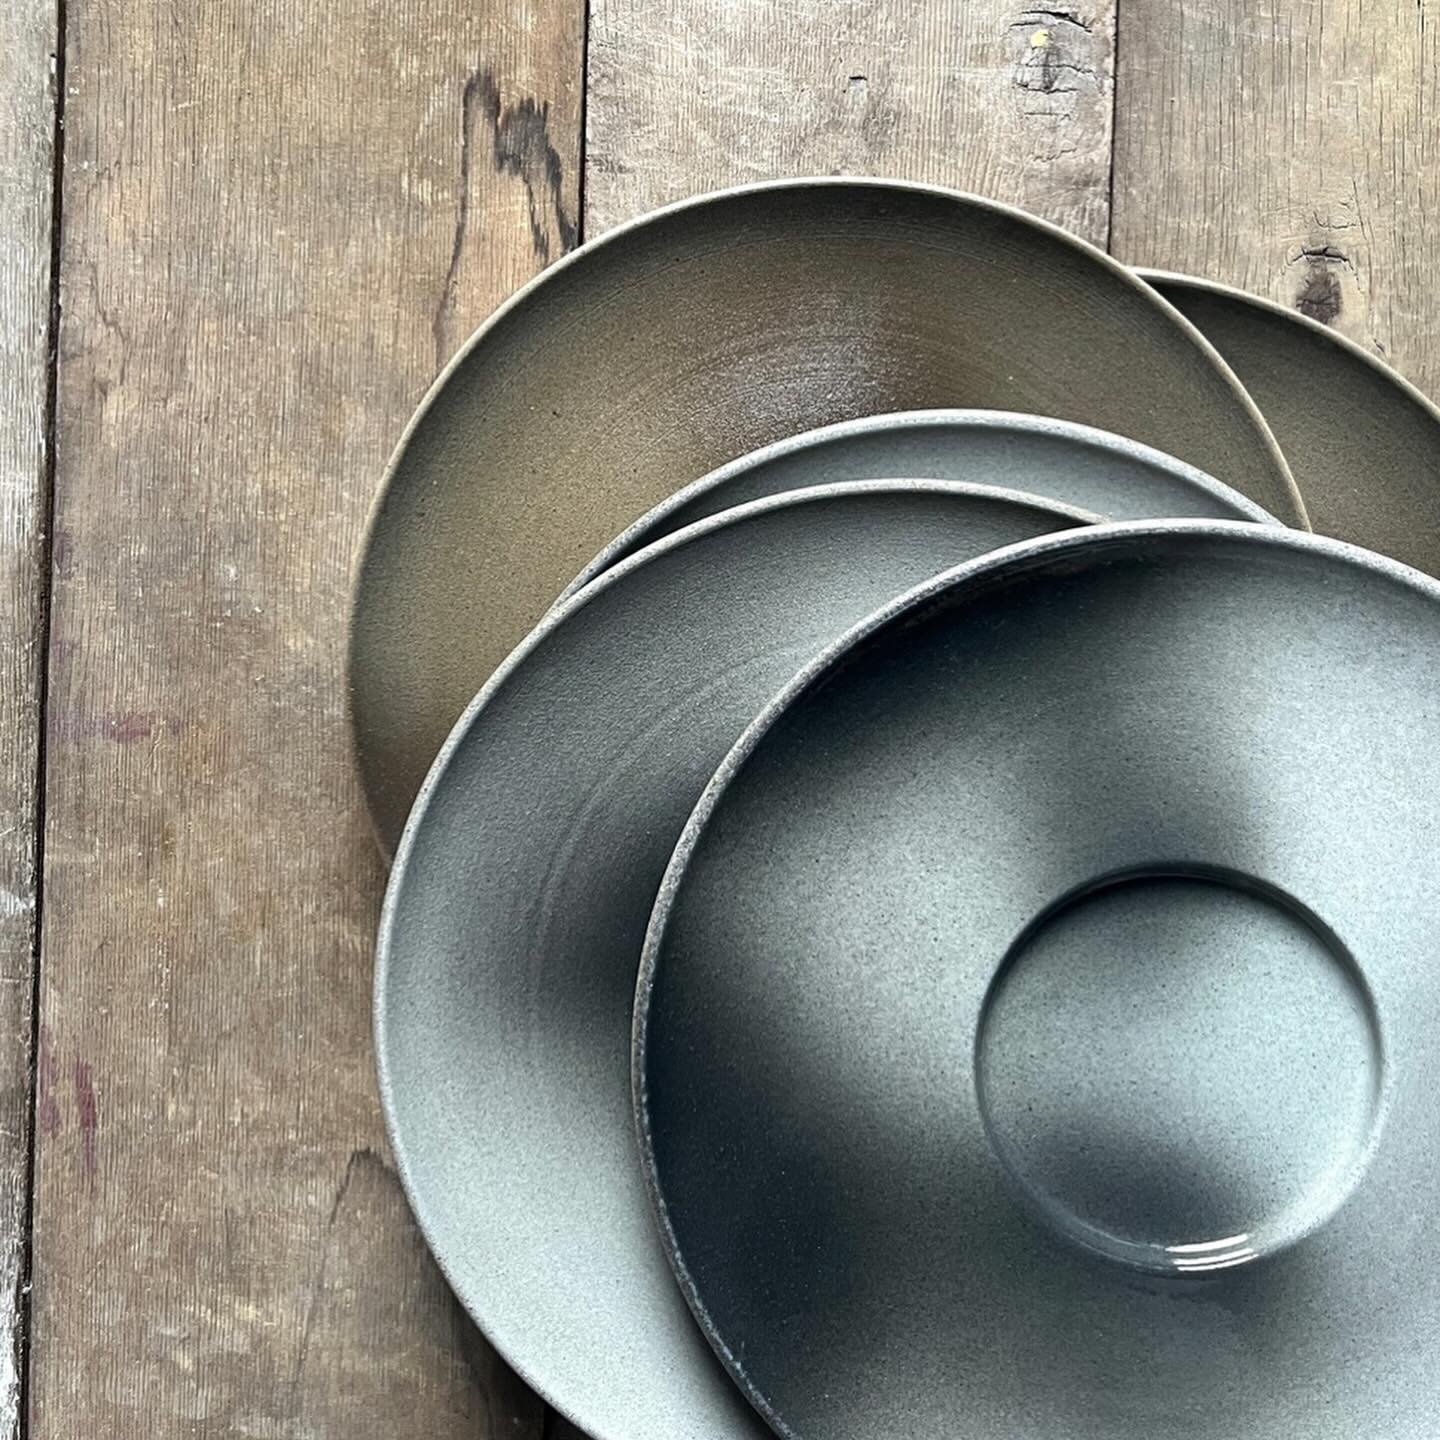 The market is on sale! One week only, 20% off all sets in our market! Looking for good deals with some faults or perfect plates without the waiting time? Our market is the place for both! Only one of each set, what you see is what you get. Sale ends 